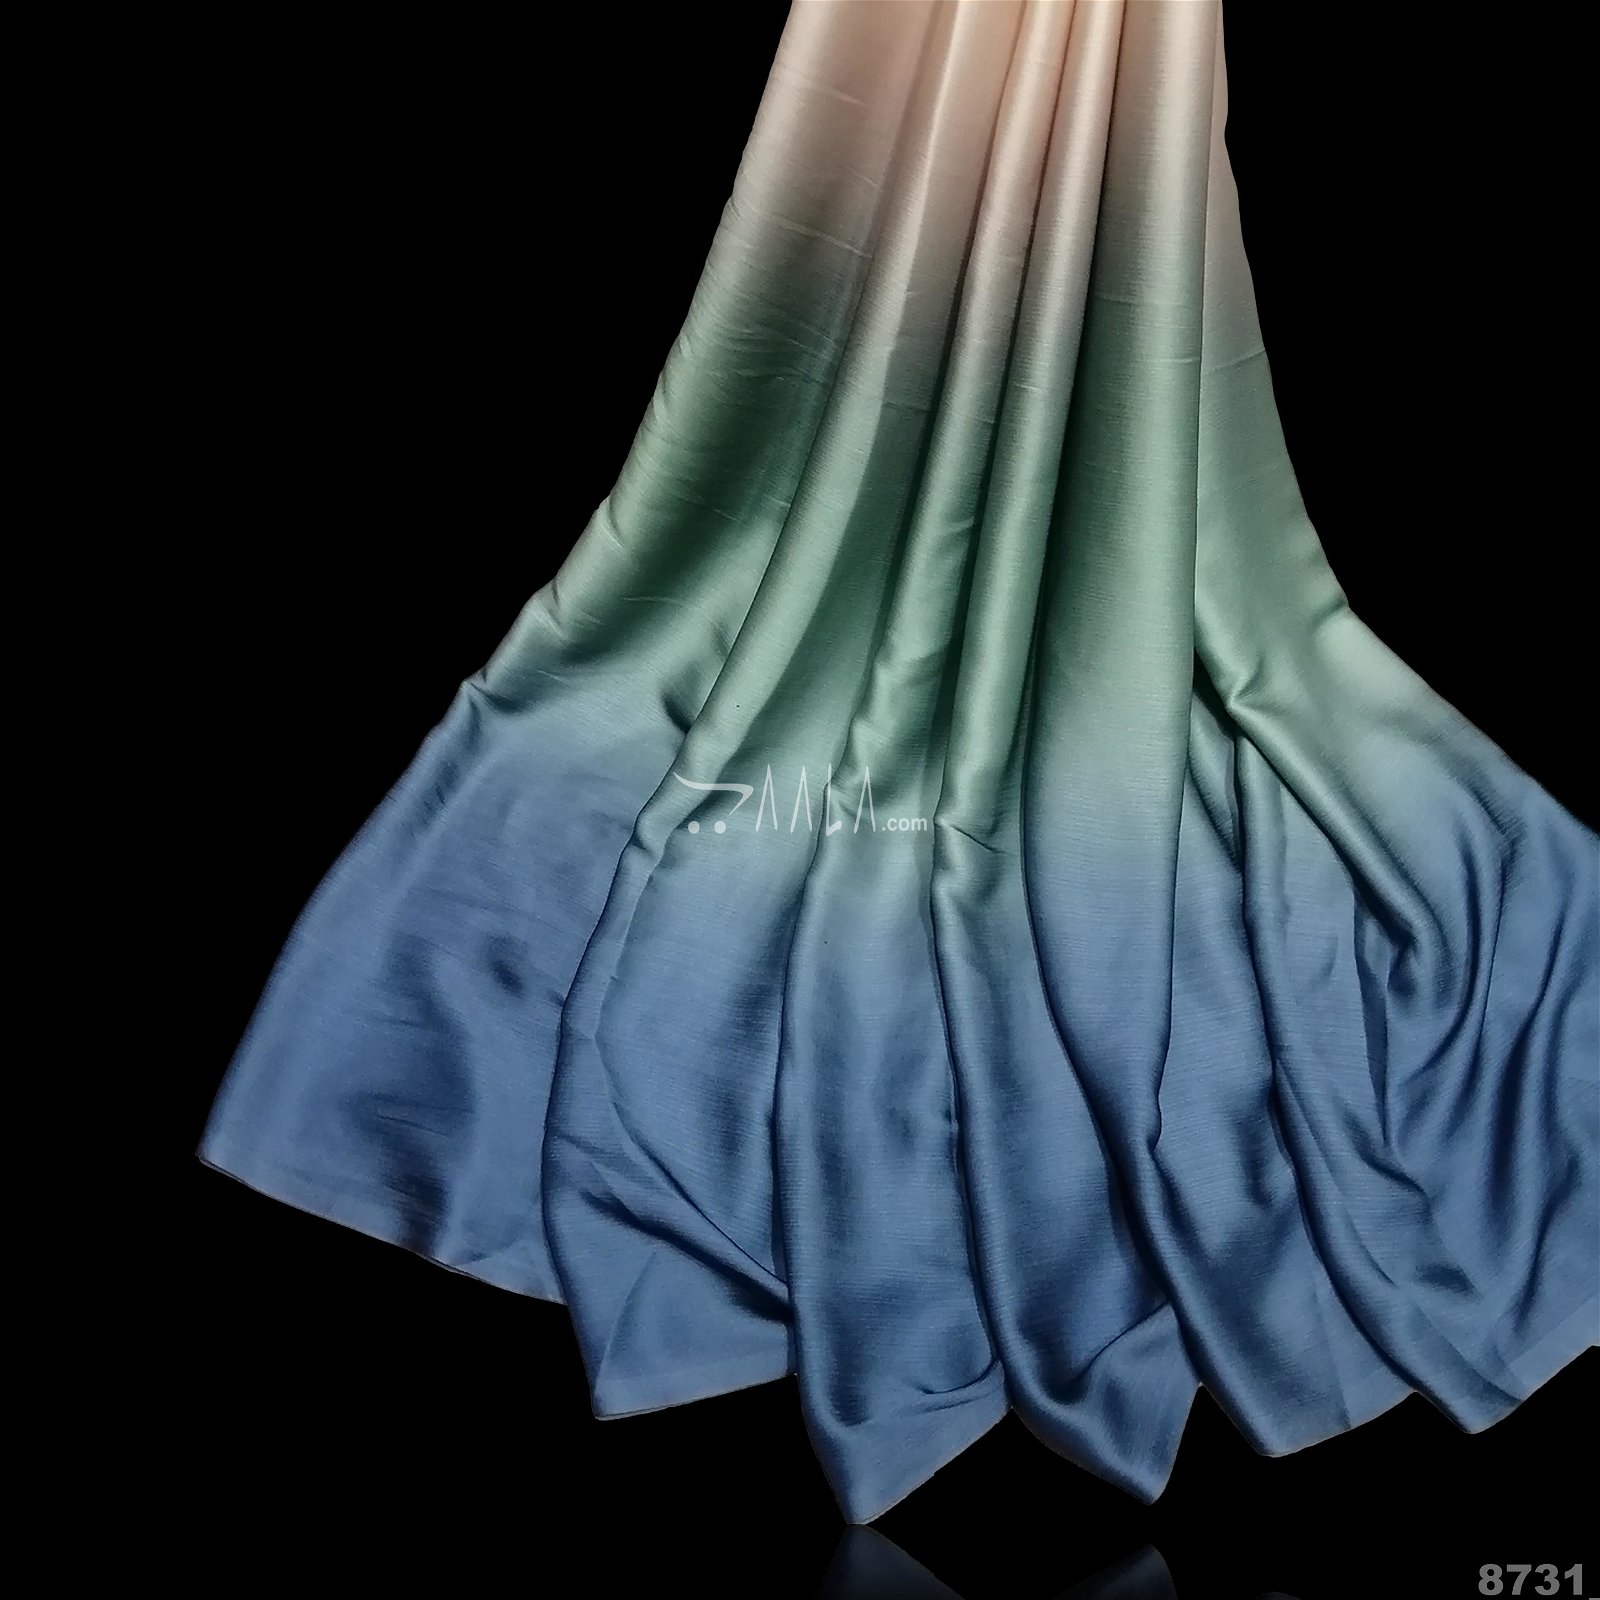 Shaded Satin-Chiffon Poly-ester 44-Inches ASSORTED Per-Metre #8731